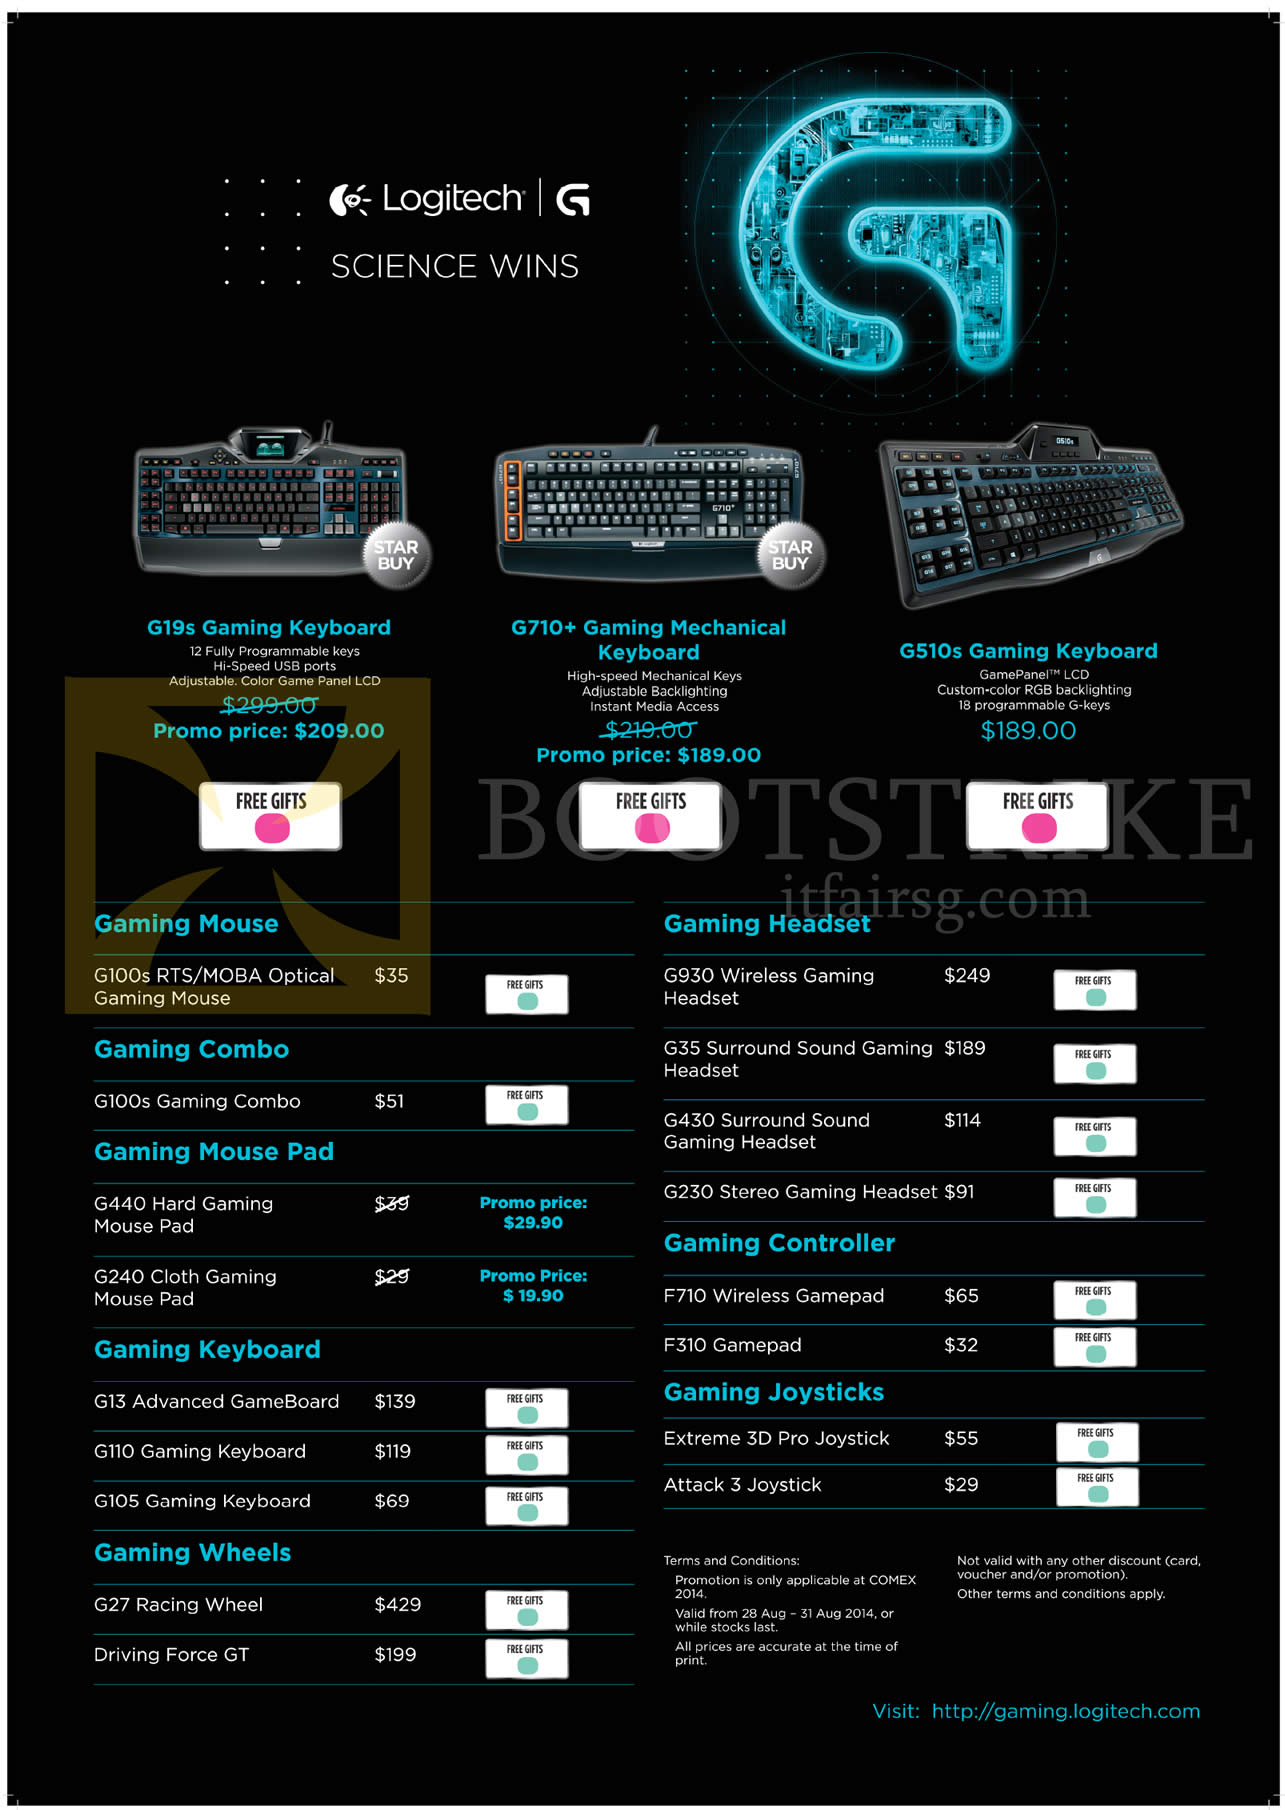 COMEX 2014 price list image brochure of Logitech Gaming Mouse G100s, Mouse Pad, Keyboard, Wheels G27 Driving Force GT, Headset, Controller, Joysticks, G19s G710 G510s G13 G110 G105